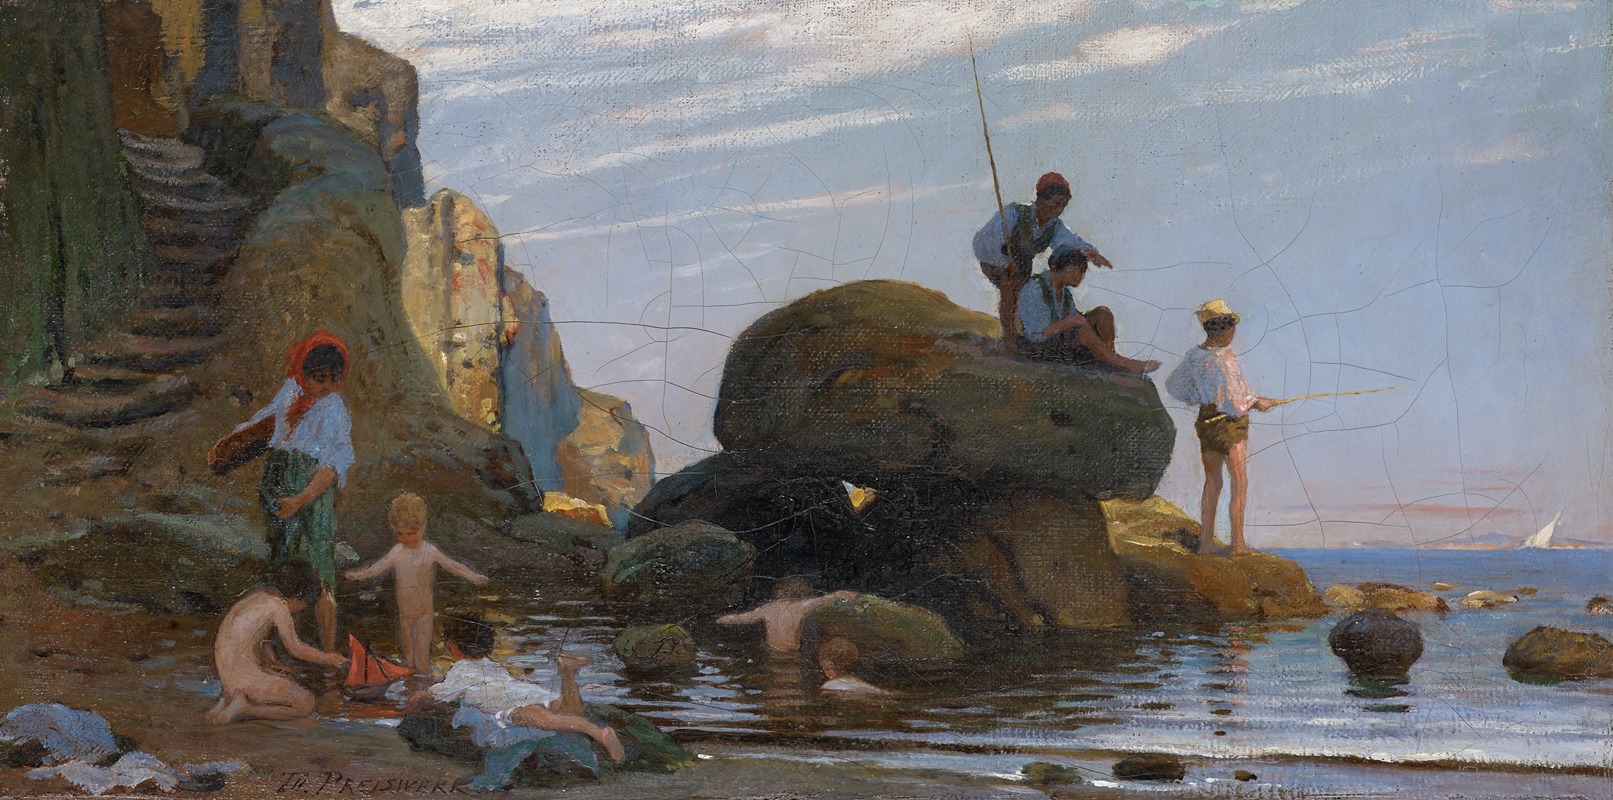 Theophil Preiswerk - Fisherman and Bathing Children at the Sea Beach